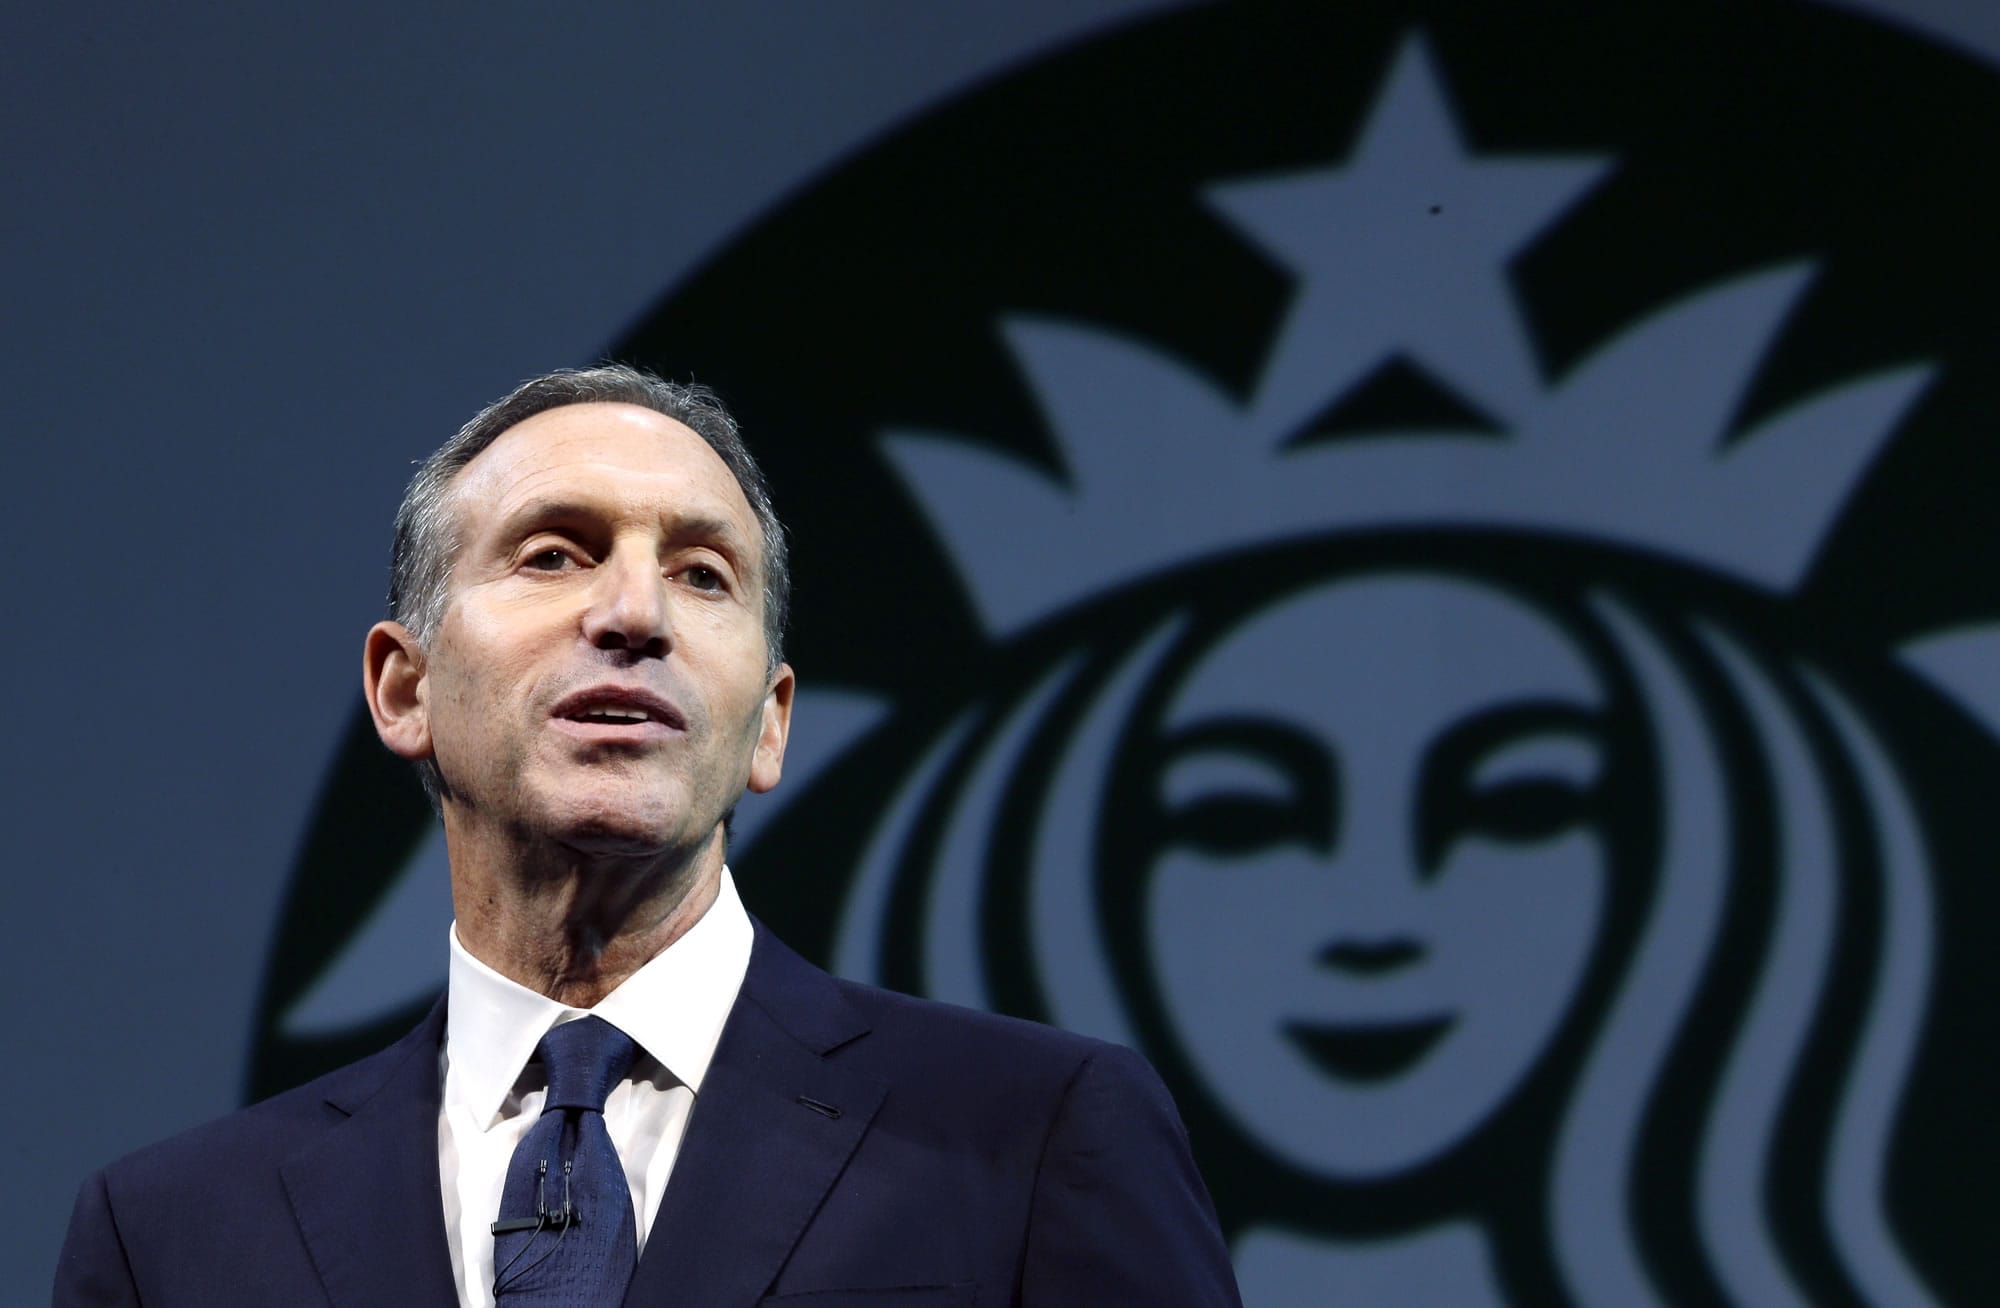 Starbucks CEO Howard Schultz speaks at the company's annual shareholders meeting in March in Seattle. From Wednesday to Friday the coffee chain is offering a free tall brewed coffee to any customer in the U.S.